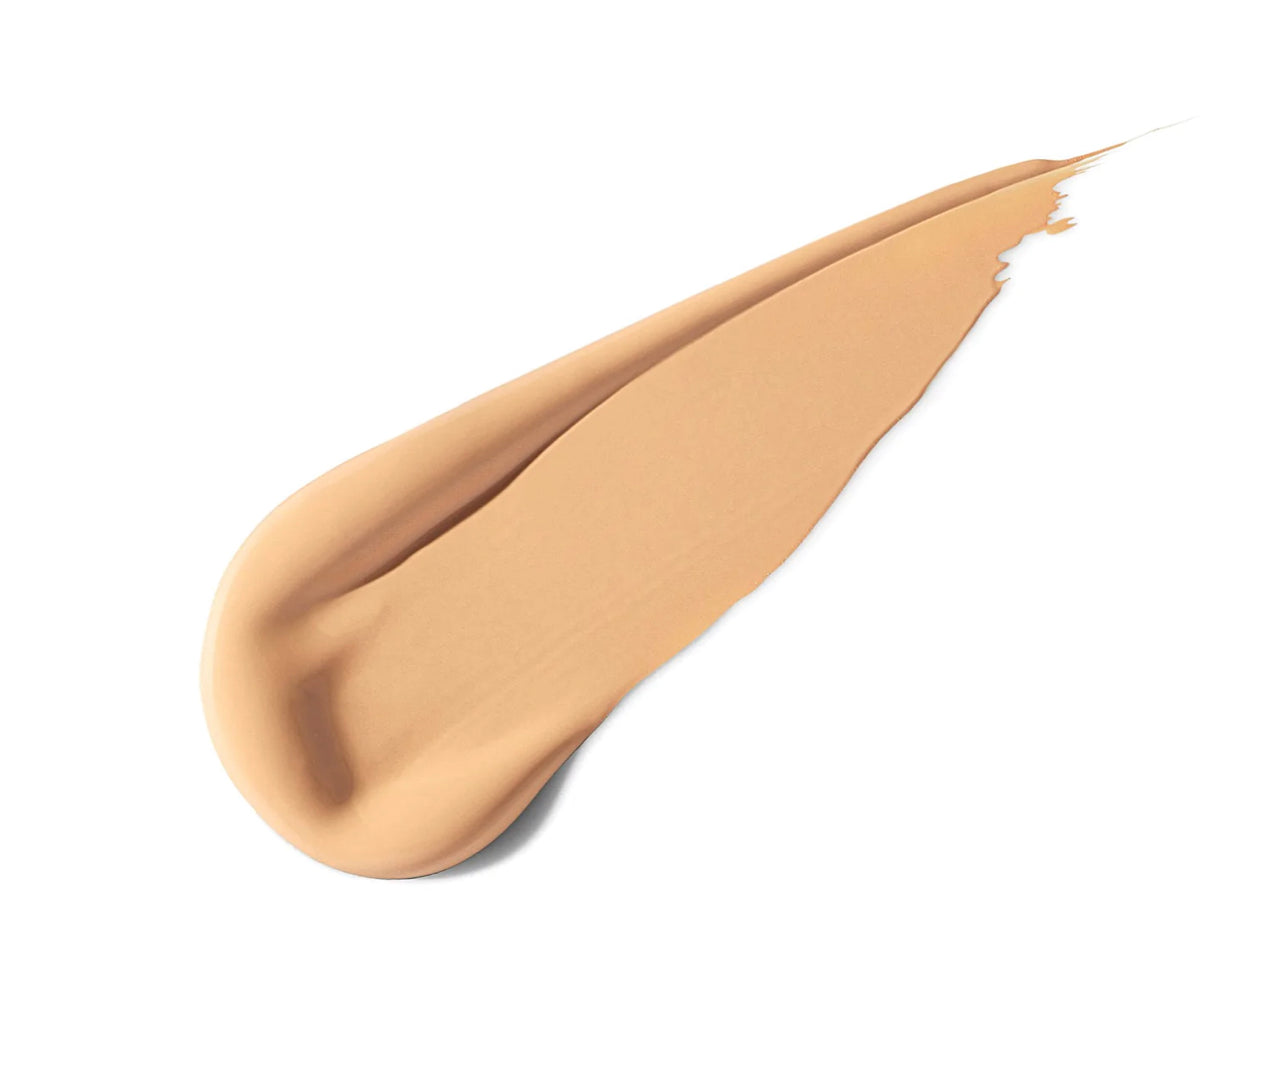 Morphe Fluidity  full-coverage concealer